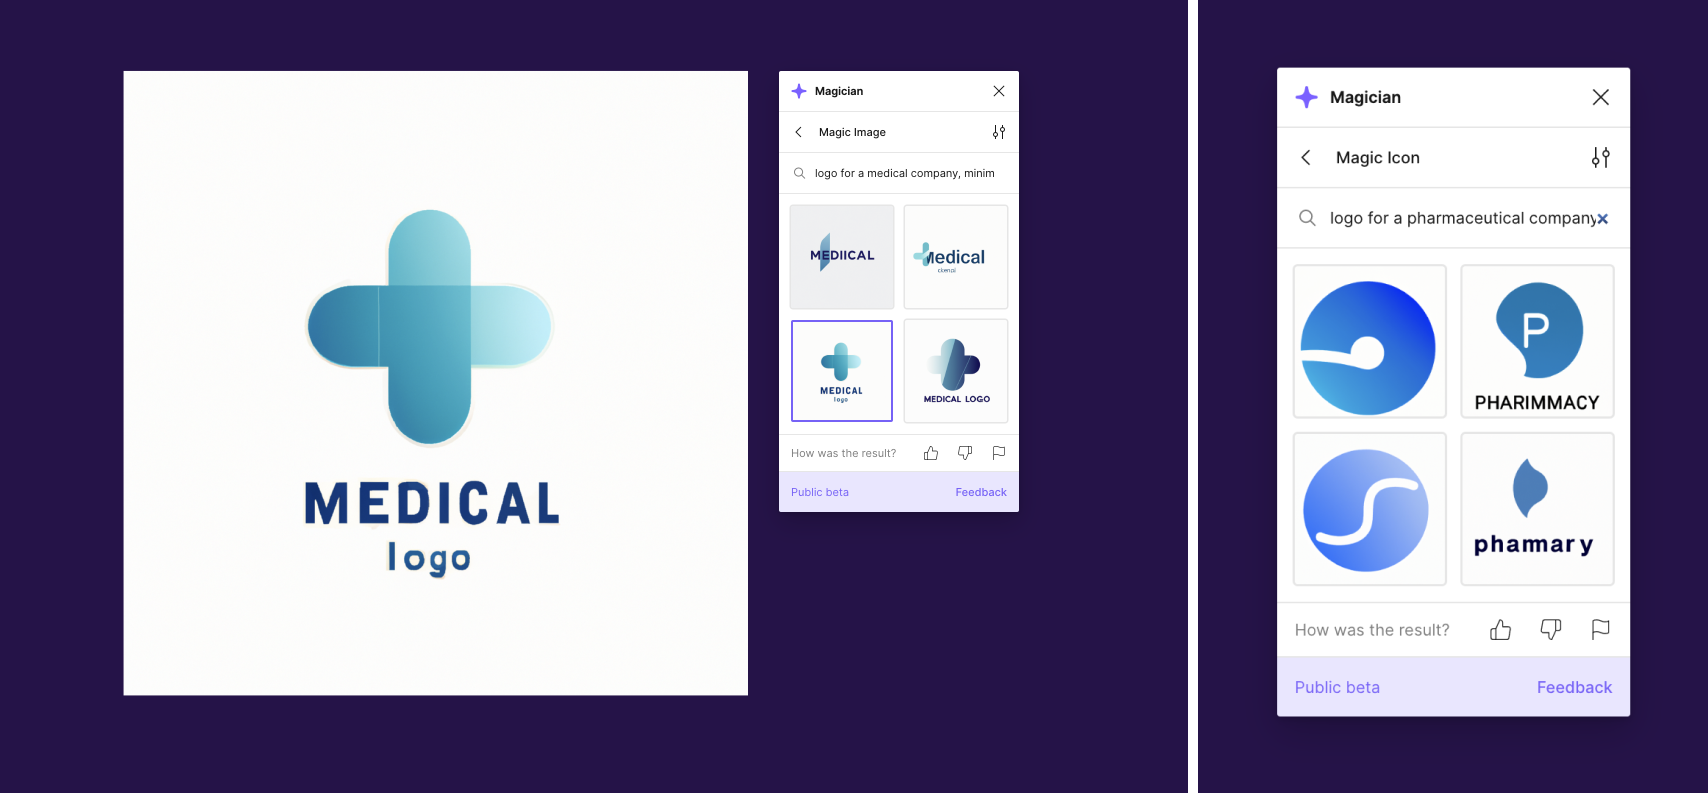 AI generated images of a medical company logo concept, using the tool Dall-E 2